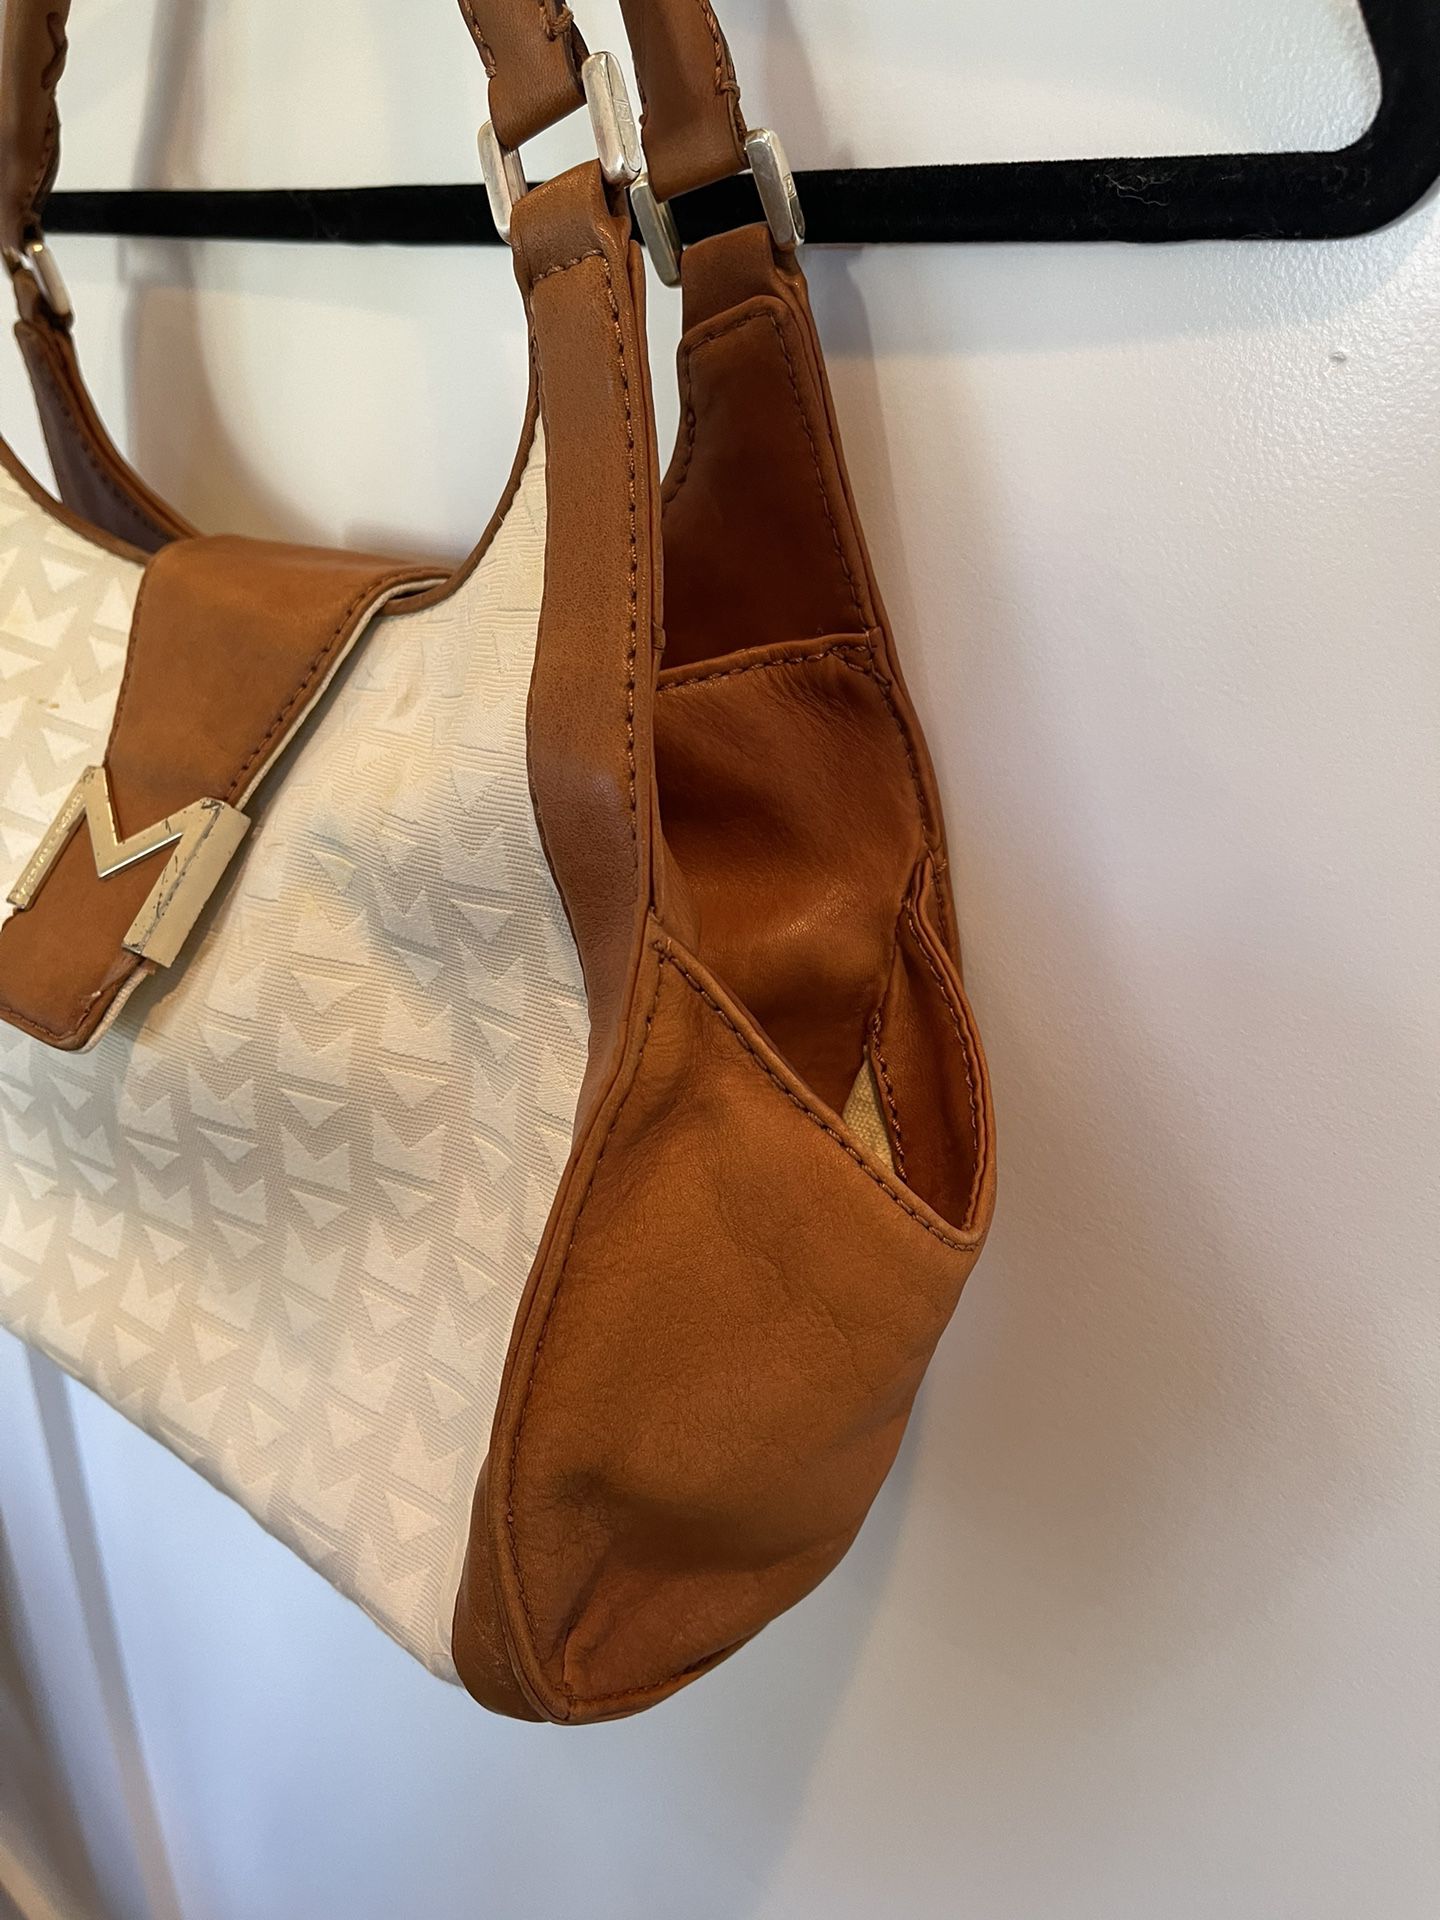 Michael Kors Vintage Monogrammed Canvas and Leather Hobo